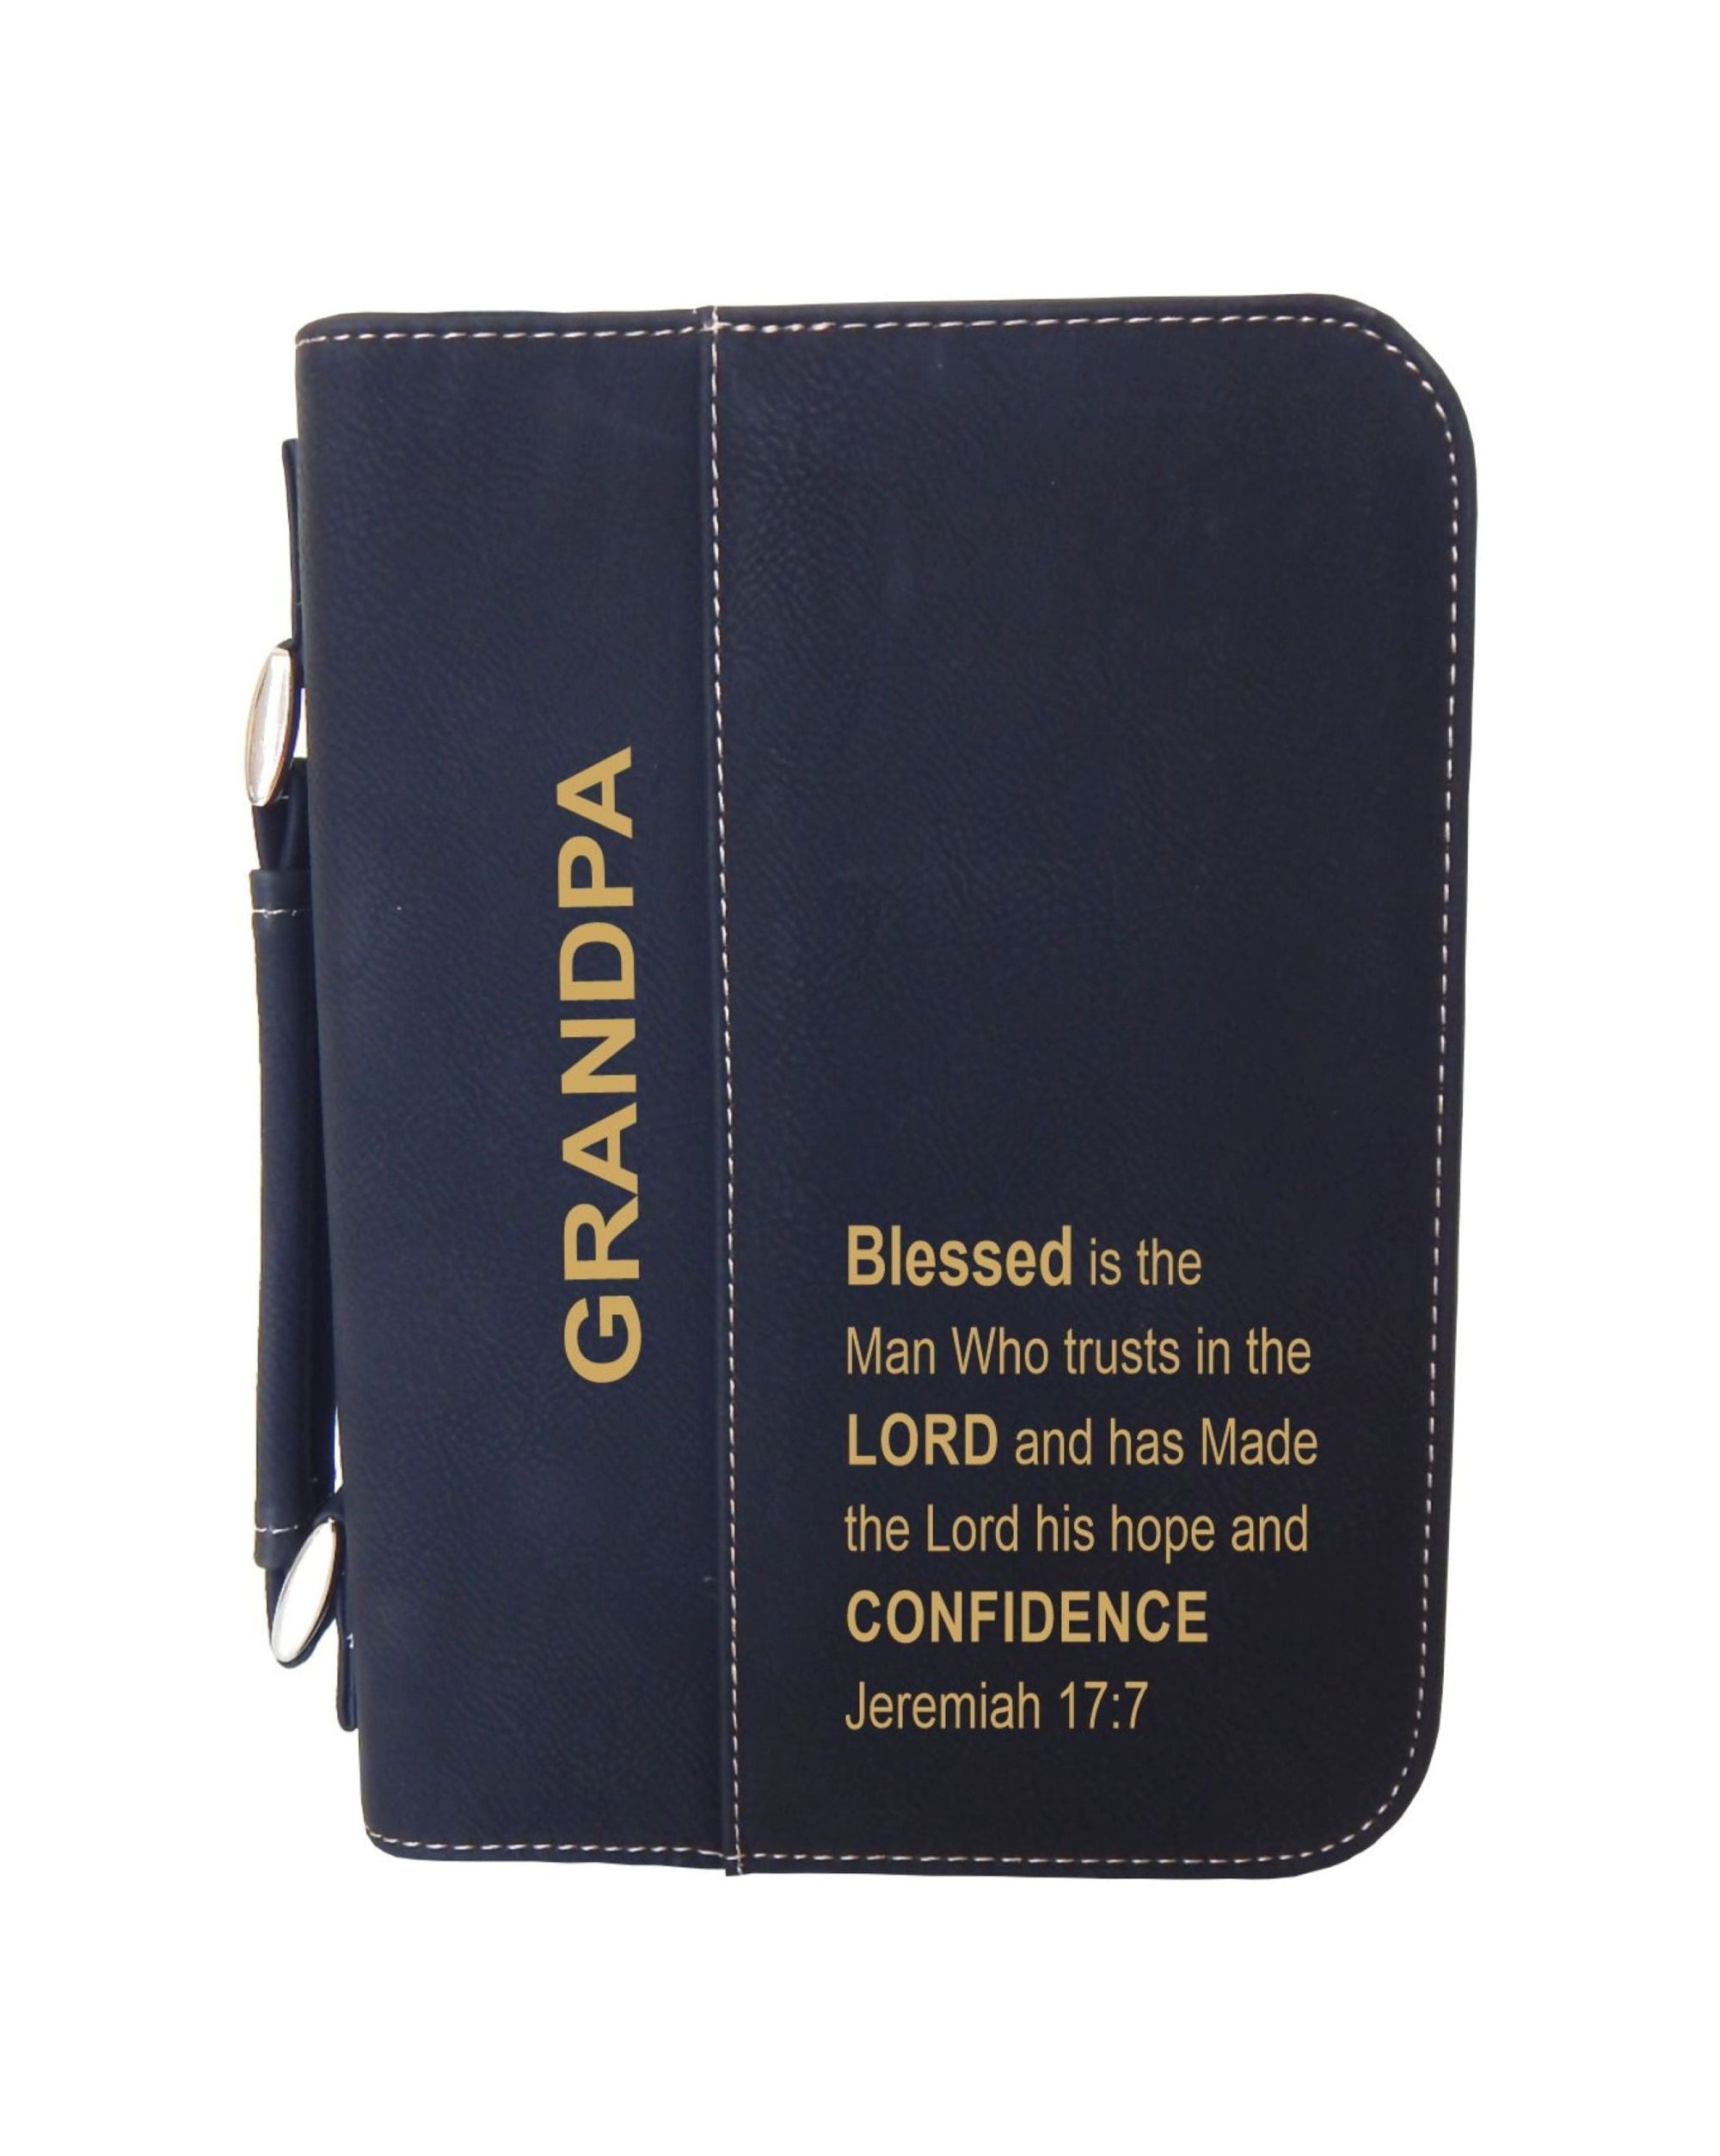 Grandfather Gift | Religious Gifts for Grandpa | Engraved Bible Cover BCL031